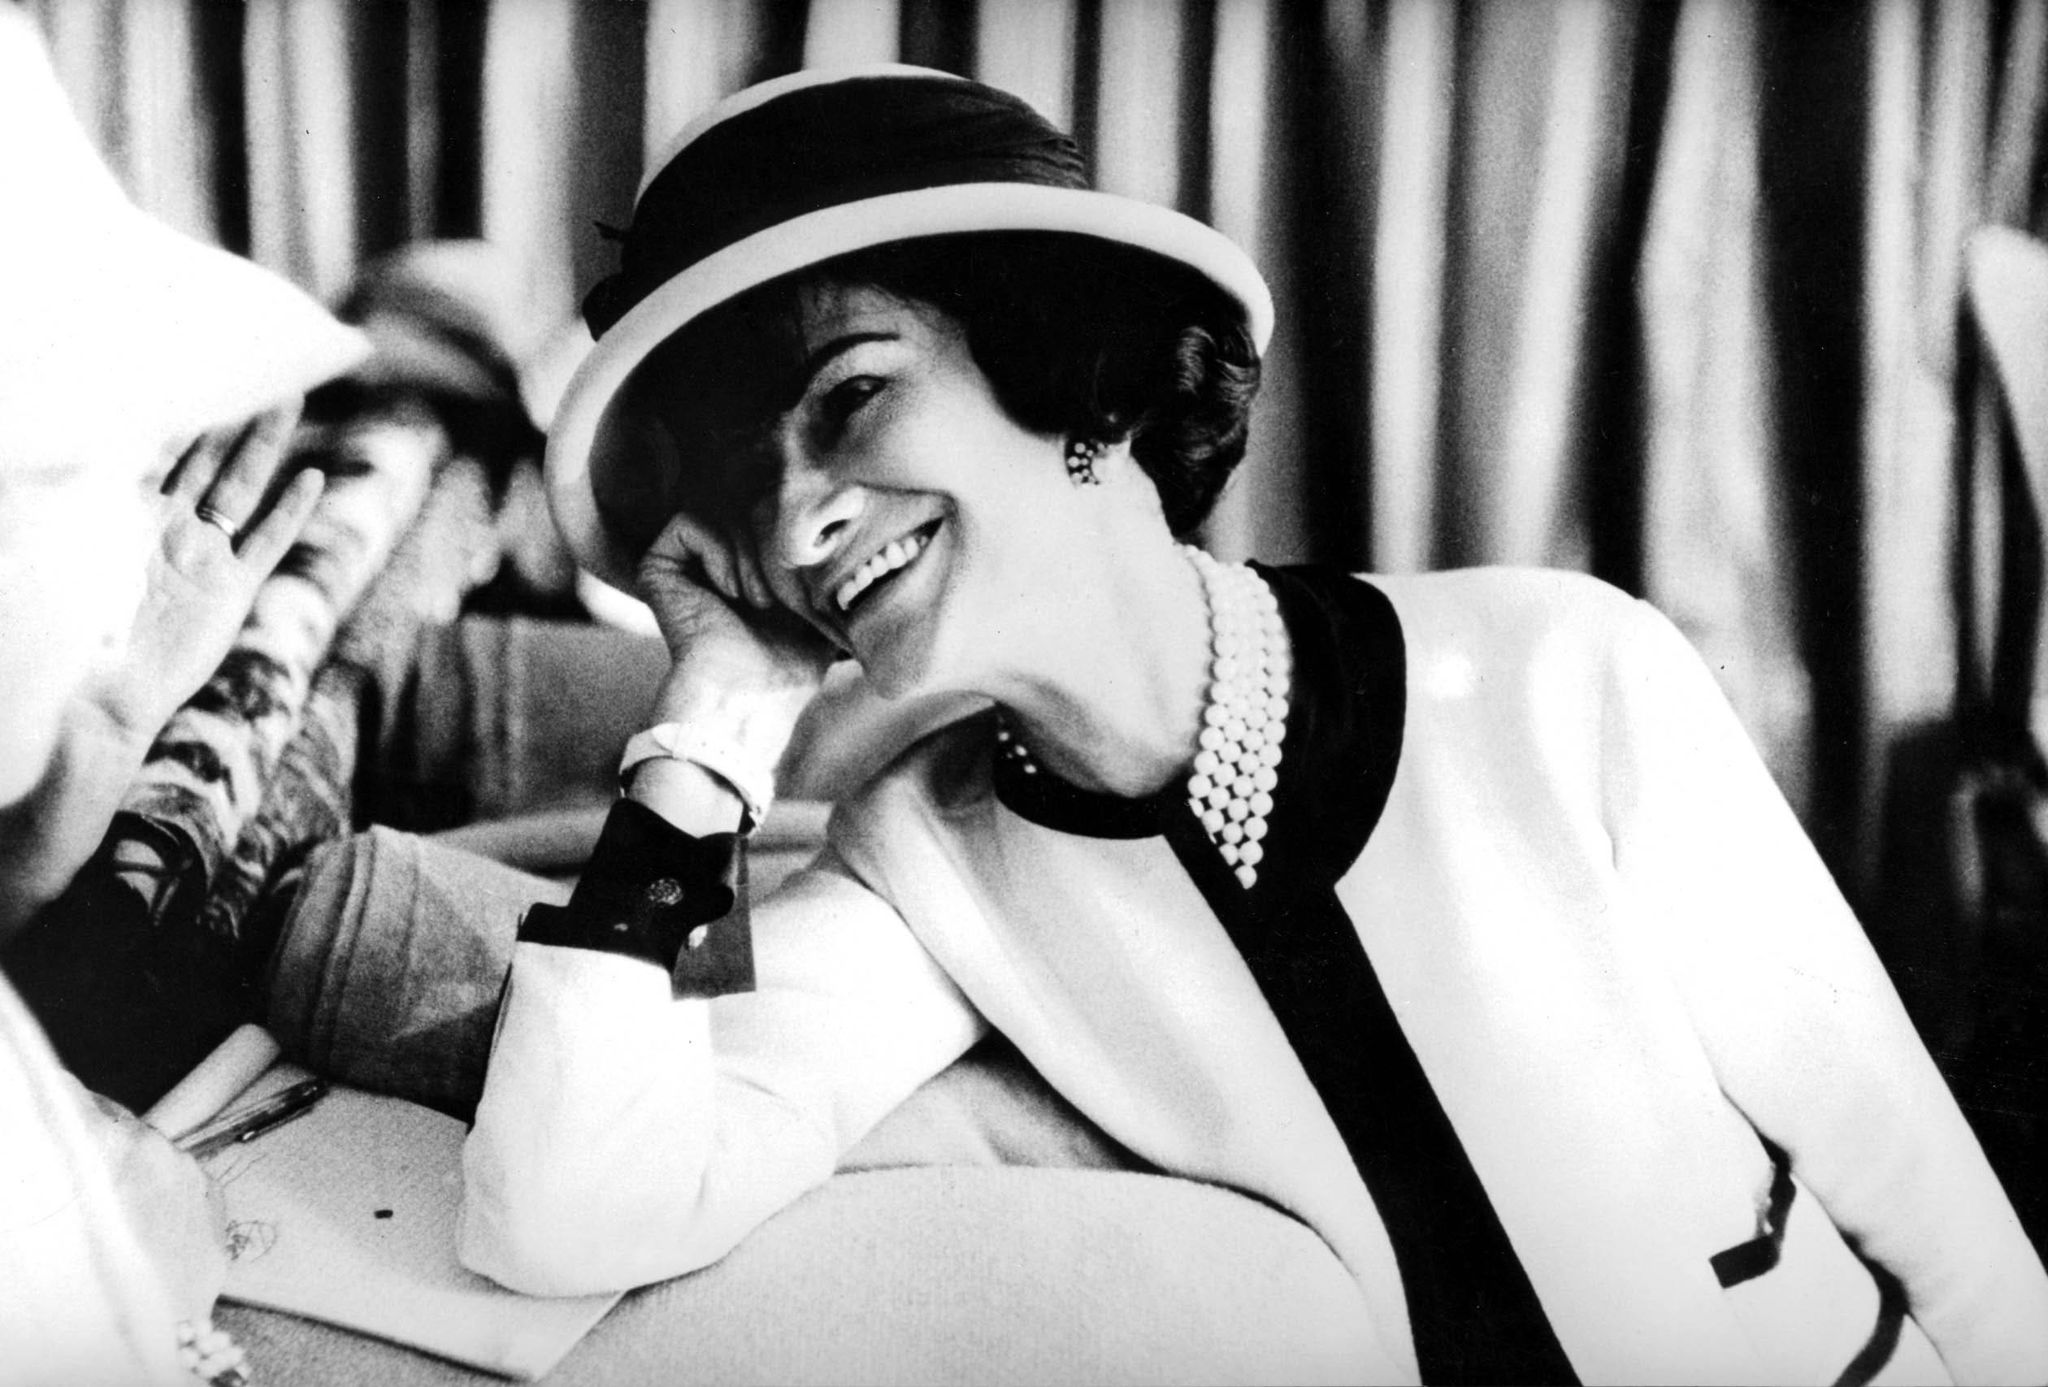 unspecified fashion designer coco chanel 1883 1971 , c early 50's photo by apicgetty images